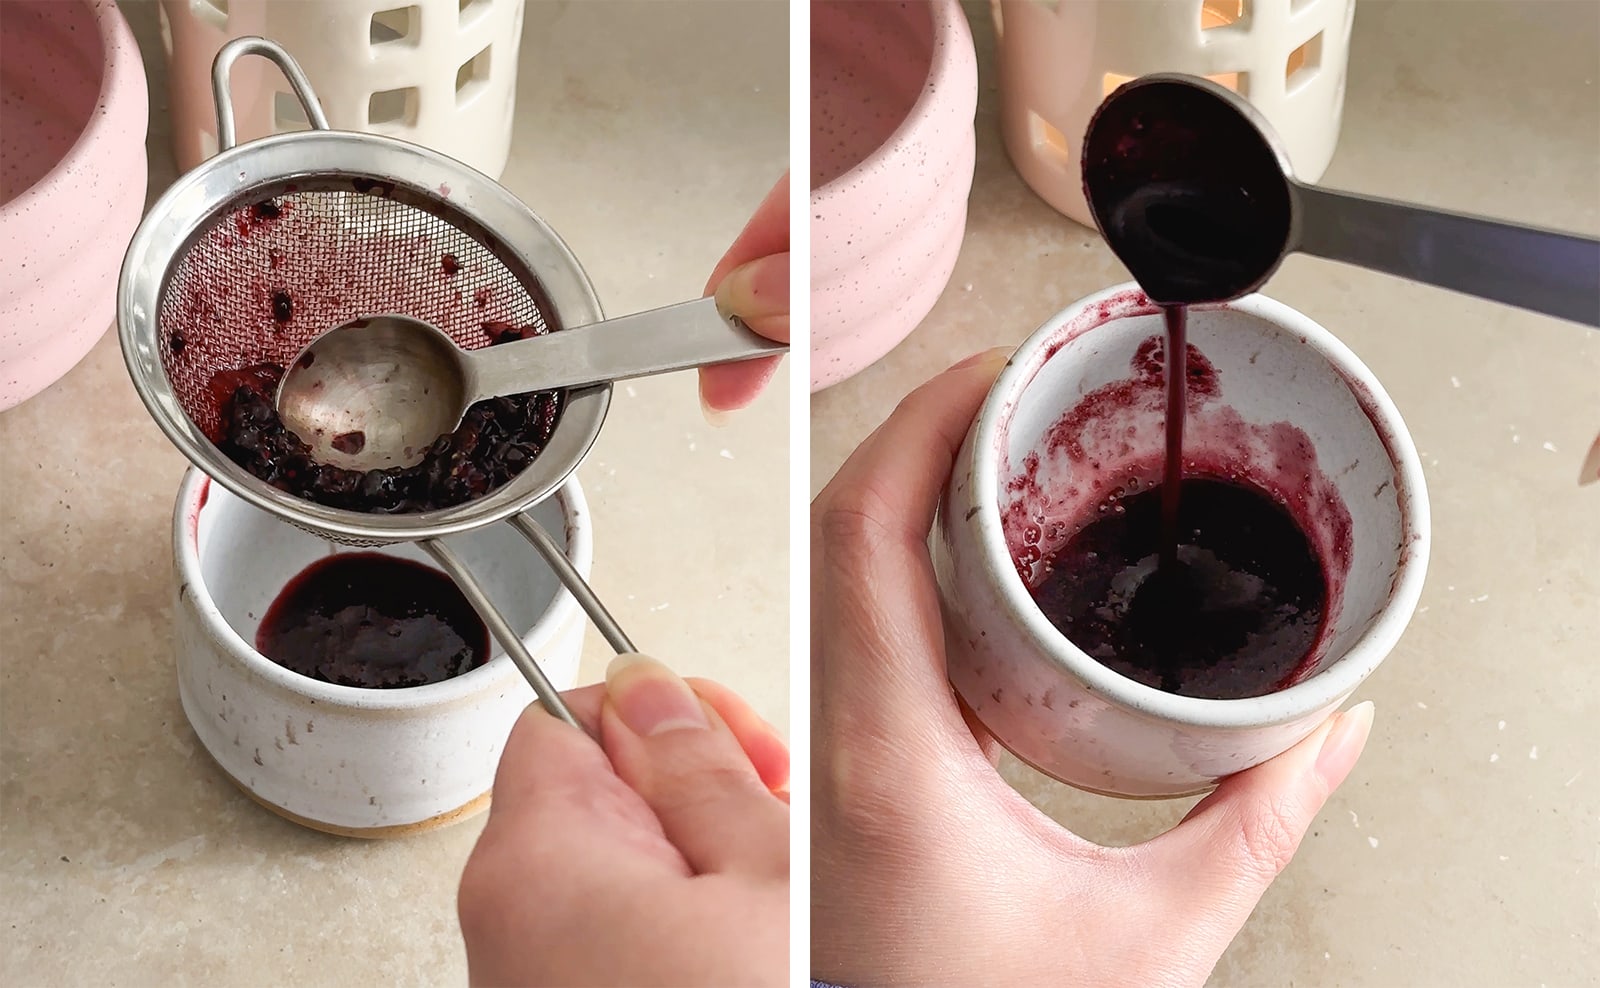 Left to right: mashing blackberries in a sieve, blackberry juice dripping from a spoon into a bowl.